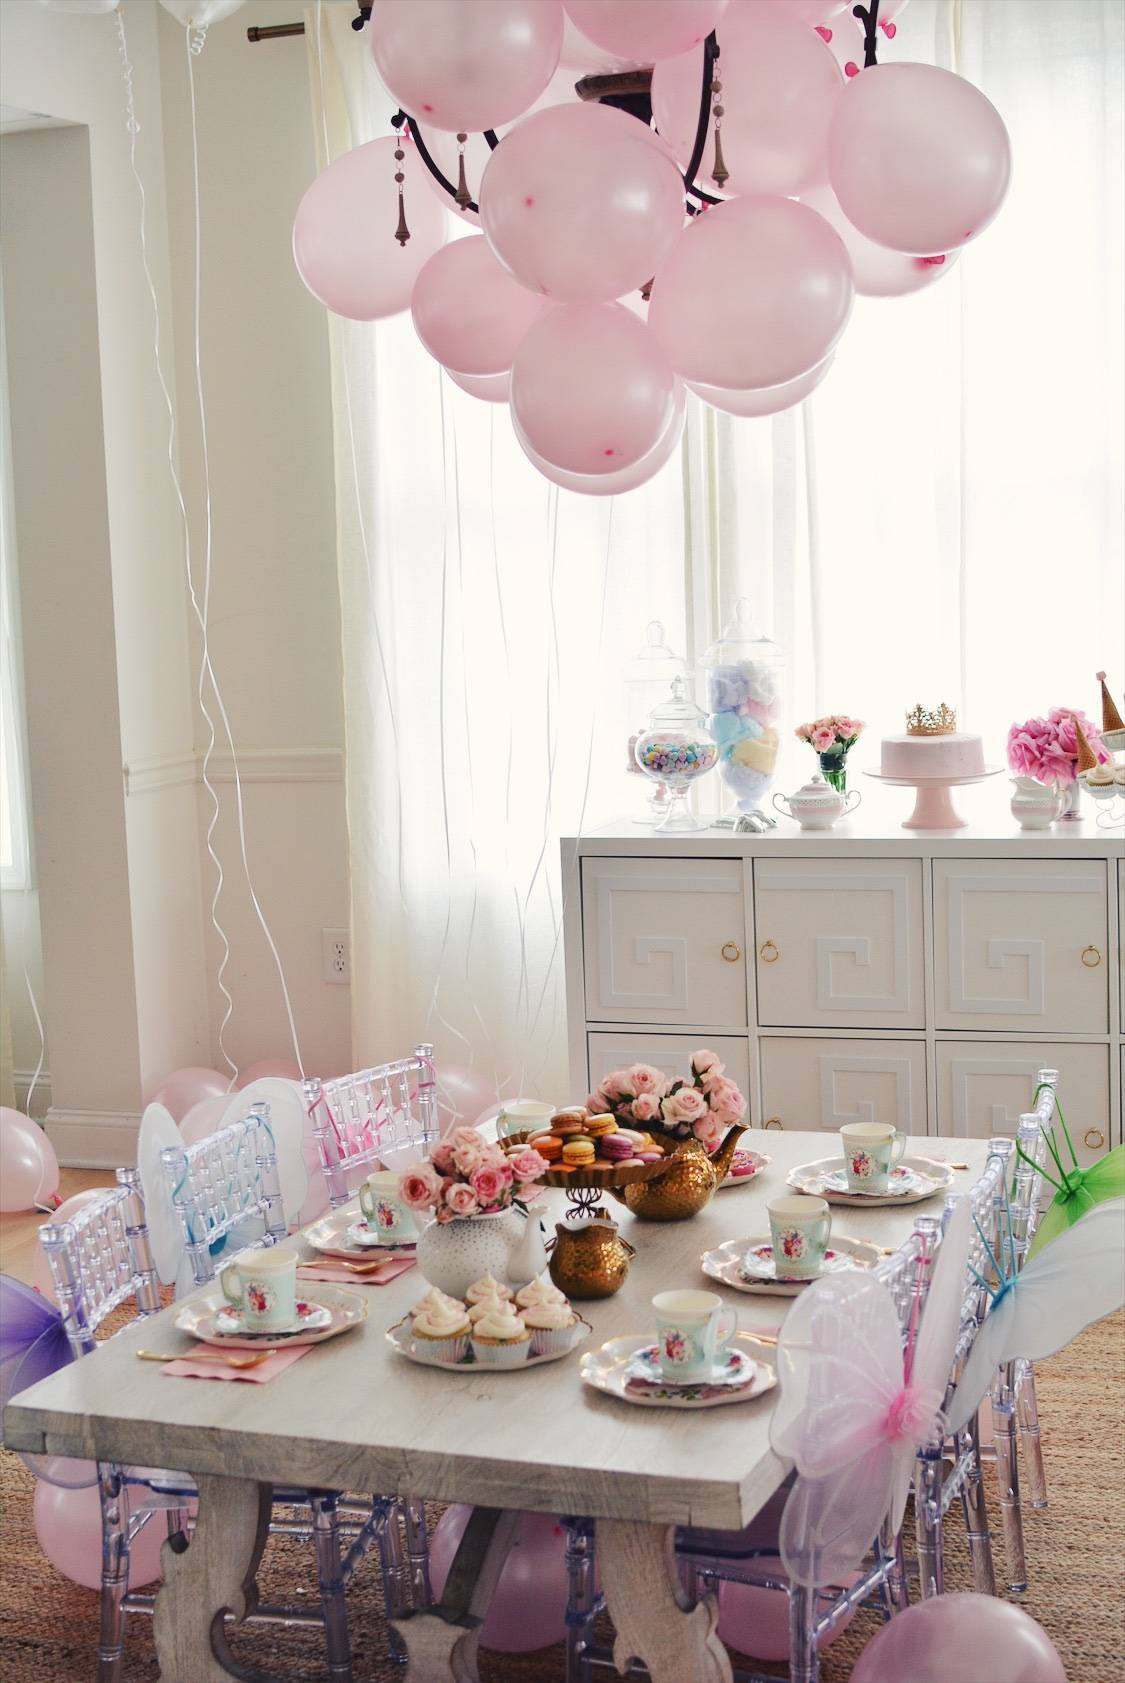 tea-party-ideas-a-princess-tea-inspired-birthday-for-a-3-year-old-the-pink-dream